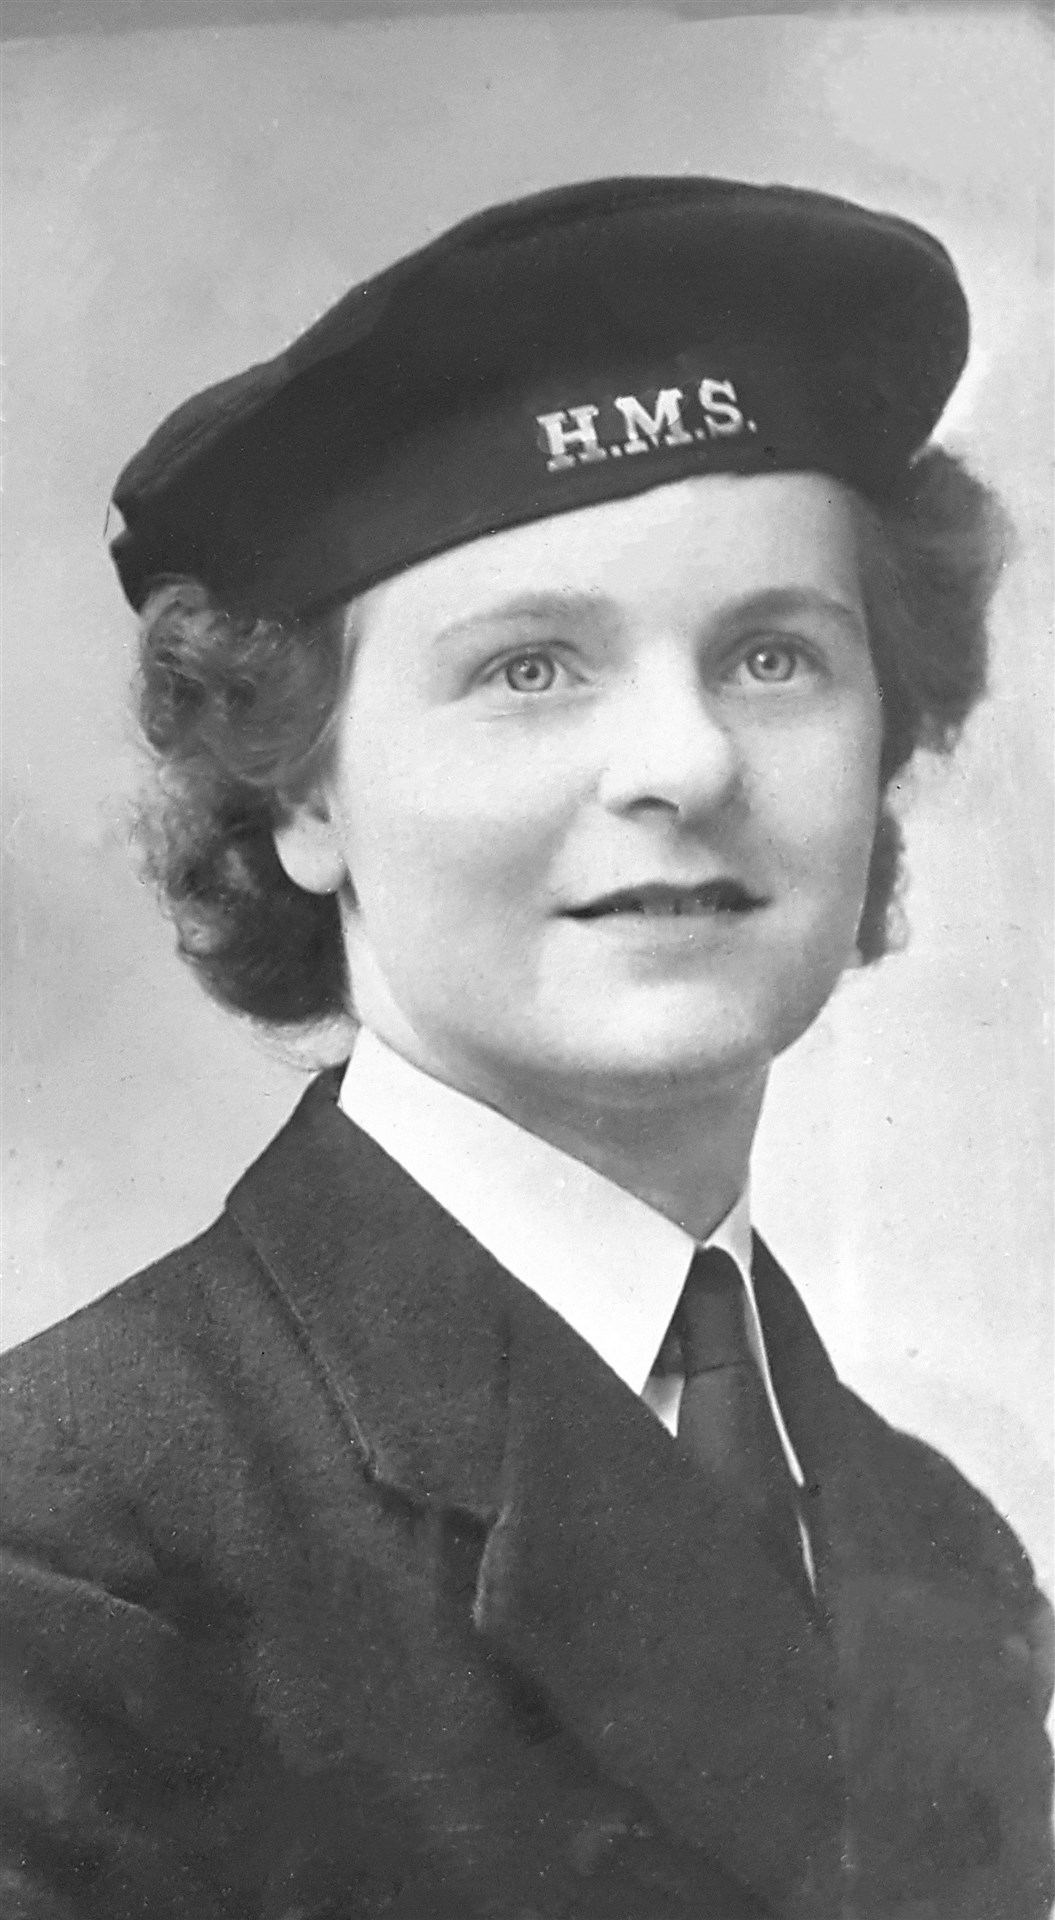 As a Wren, Isobel experienced the Blitz in London during the second world war